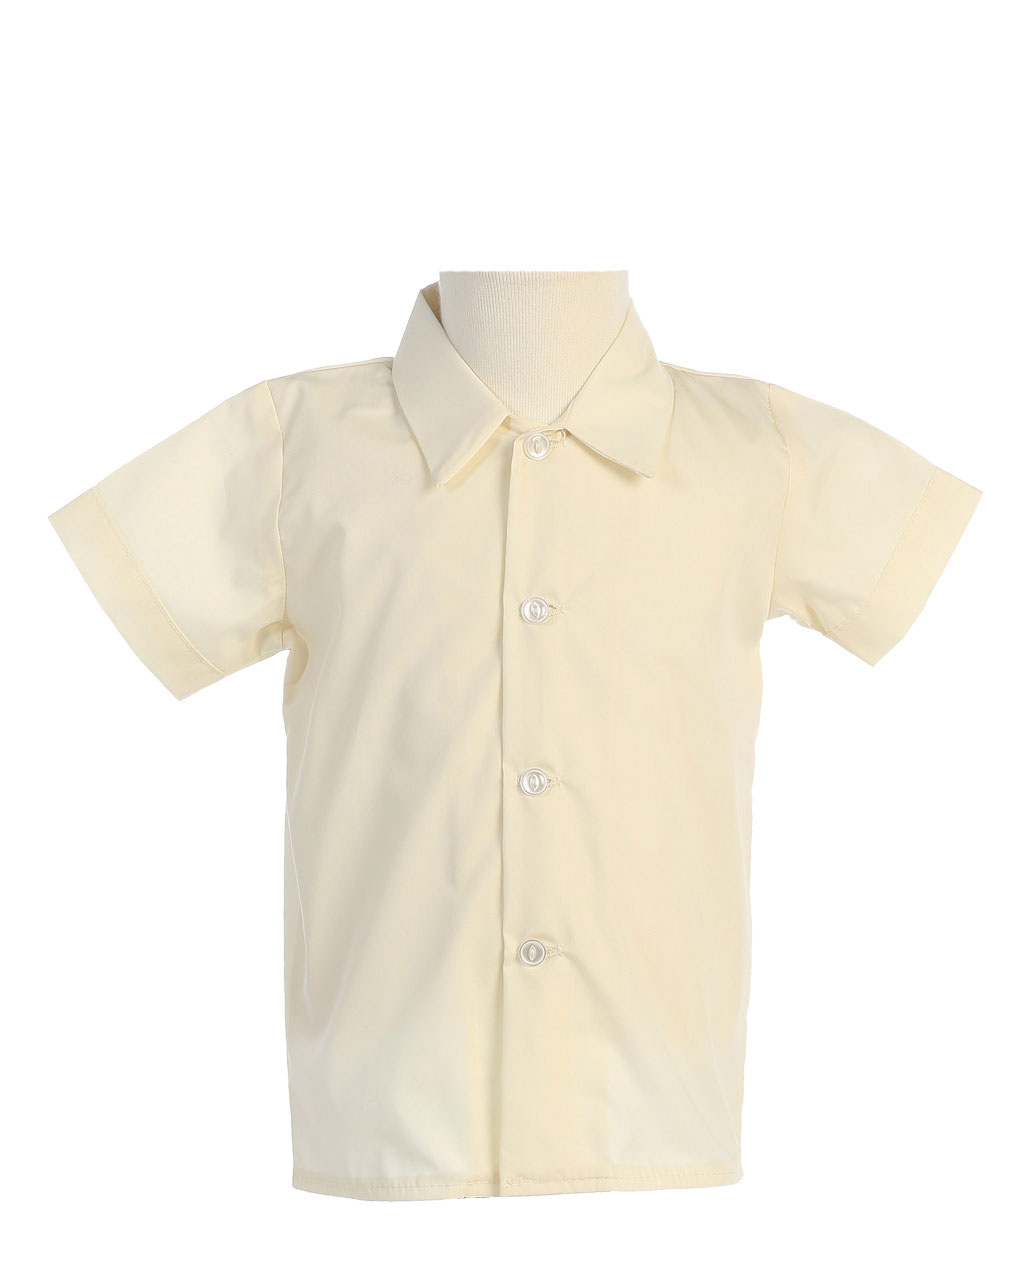 Boys Short Sleeved Simple Dress Shirt - Available in Ivory XL